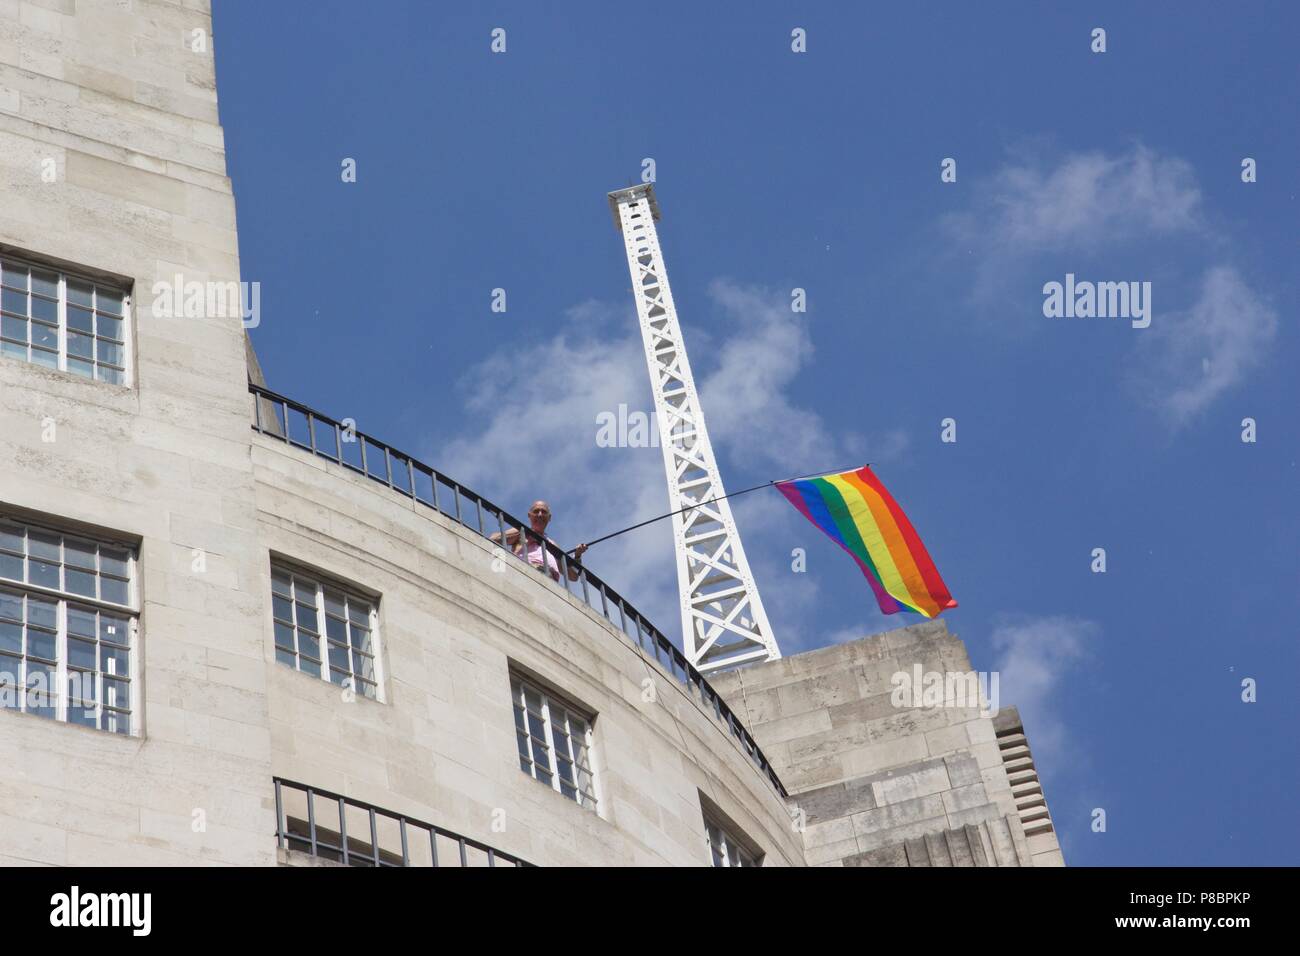 A man on top of BBC broadcasting house waving a rainbow flag at Pride in London 2018 Stock Photo